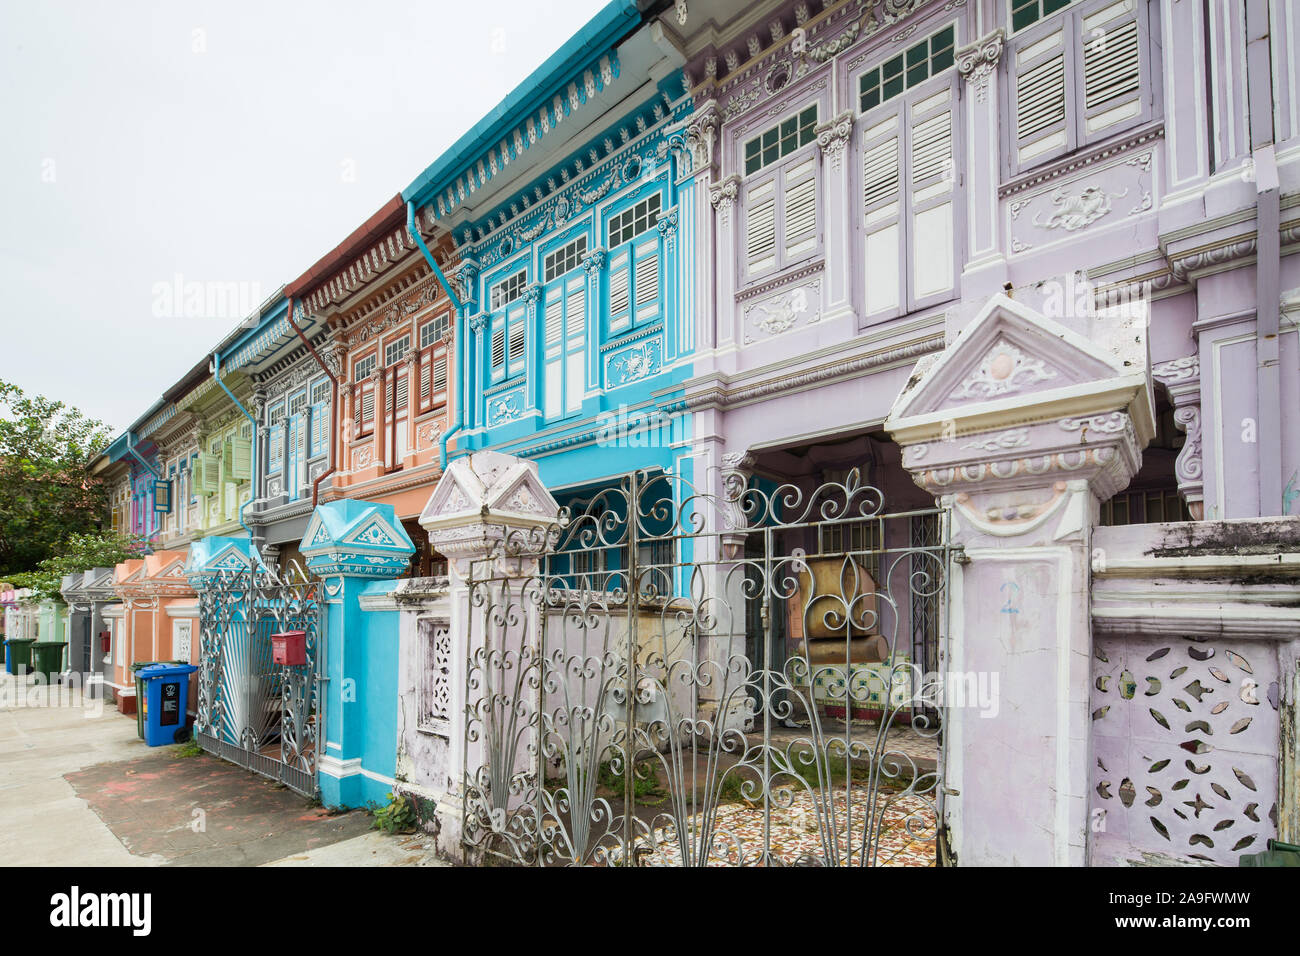 Architecture of preserved Peranakan shophouse at Joo Chiat Road, Singapore. Stock Photo